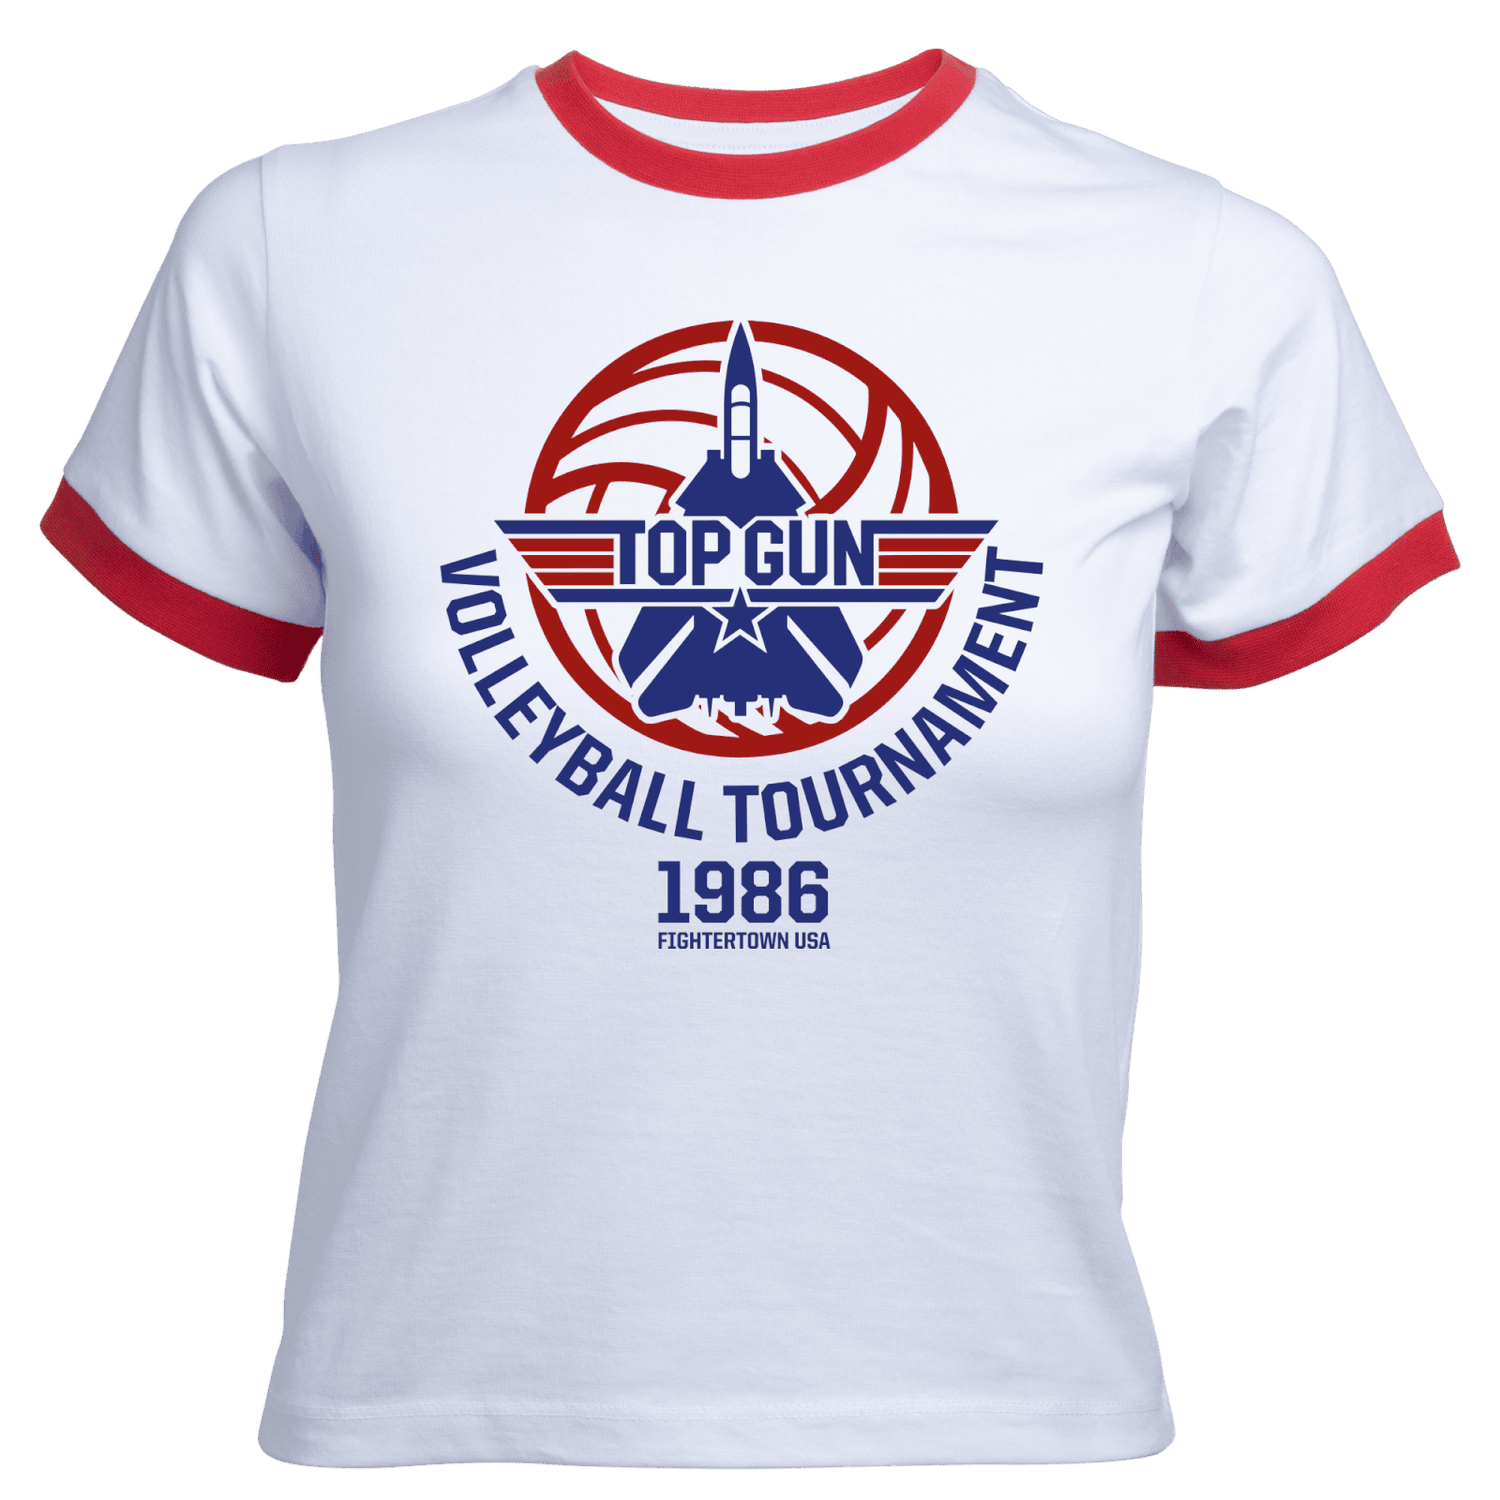 Top Gun Volleyball Tournament Women's Cropped Ringer T-Shirt - White Red